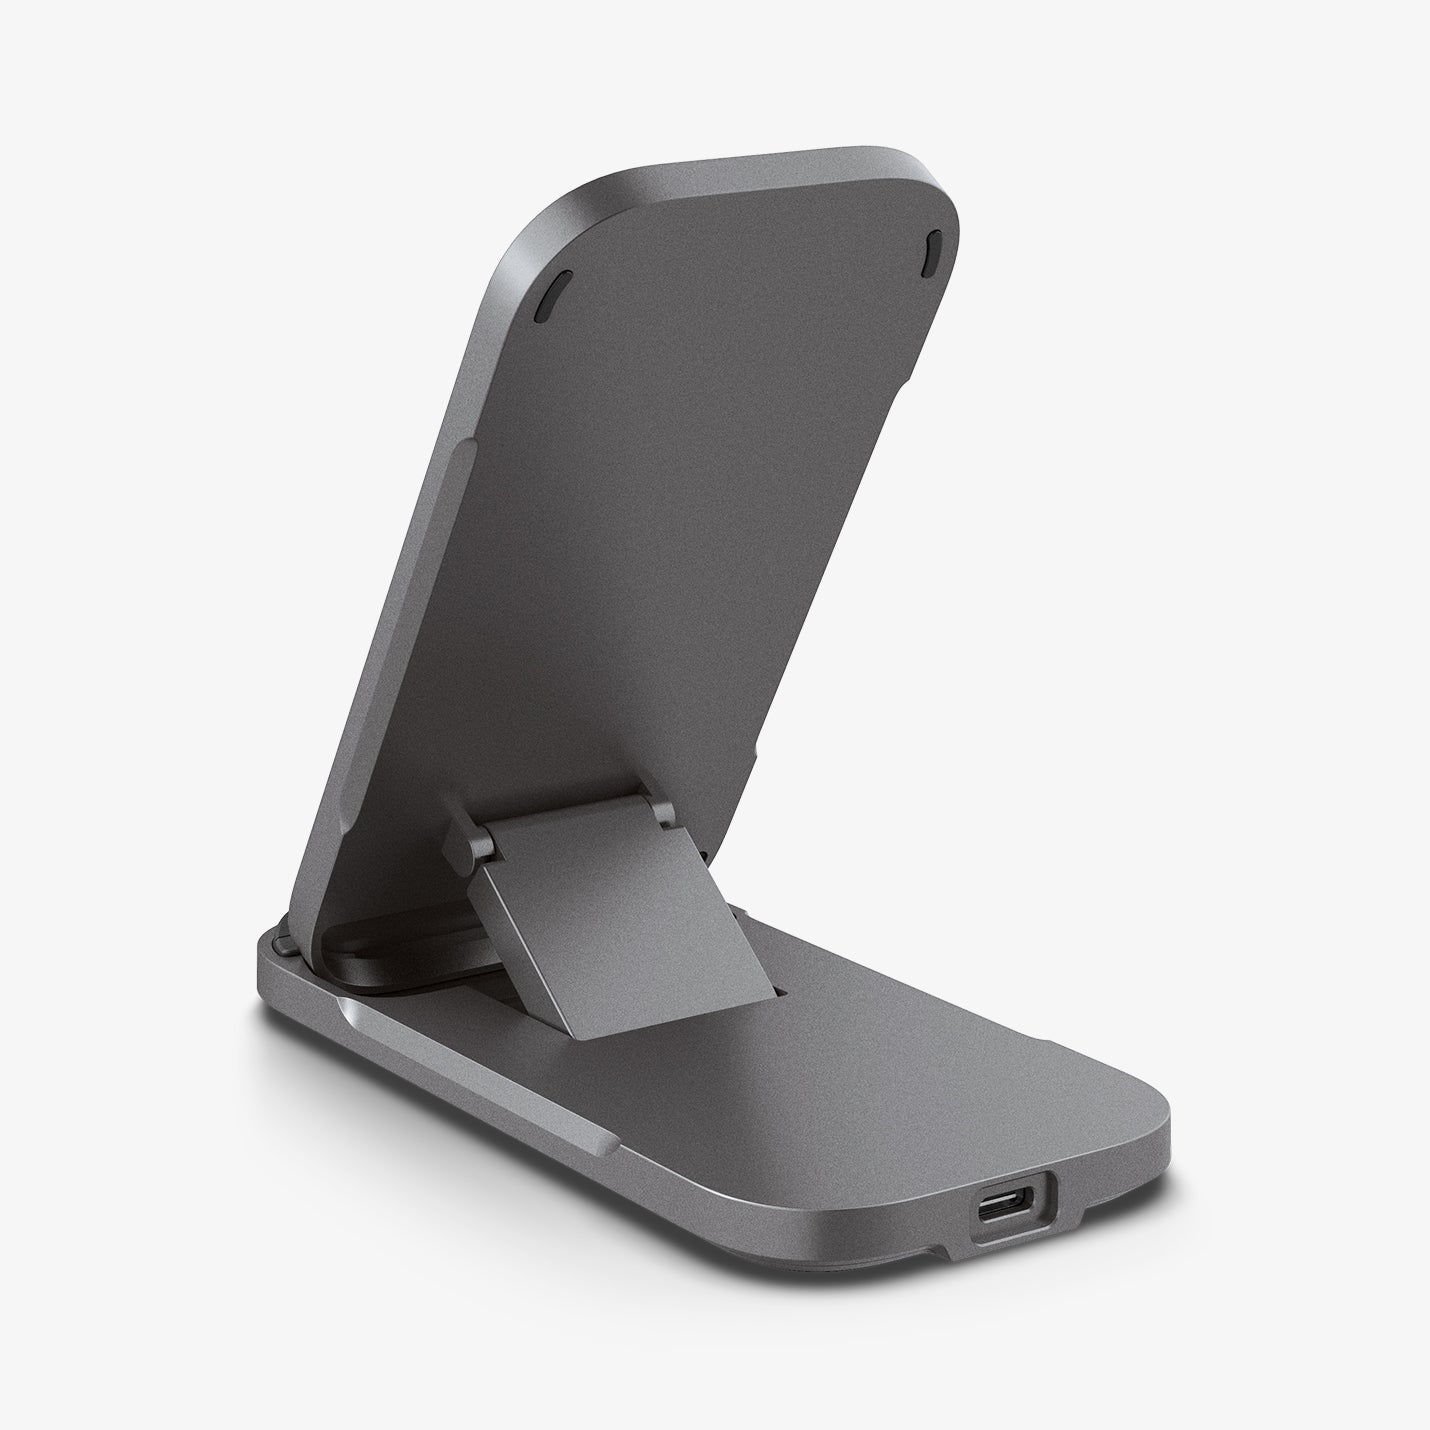 ACH04622 - ArcField™ Flex Wireless Charger PF2201 in black showing the back with charger upright